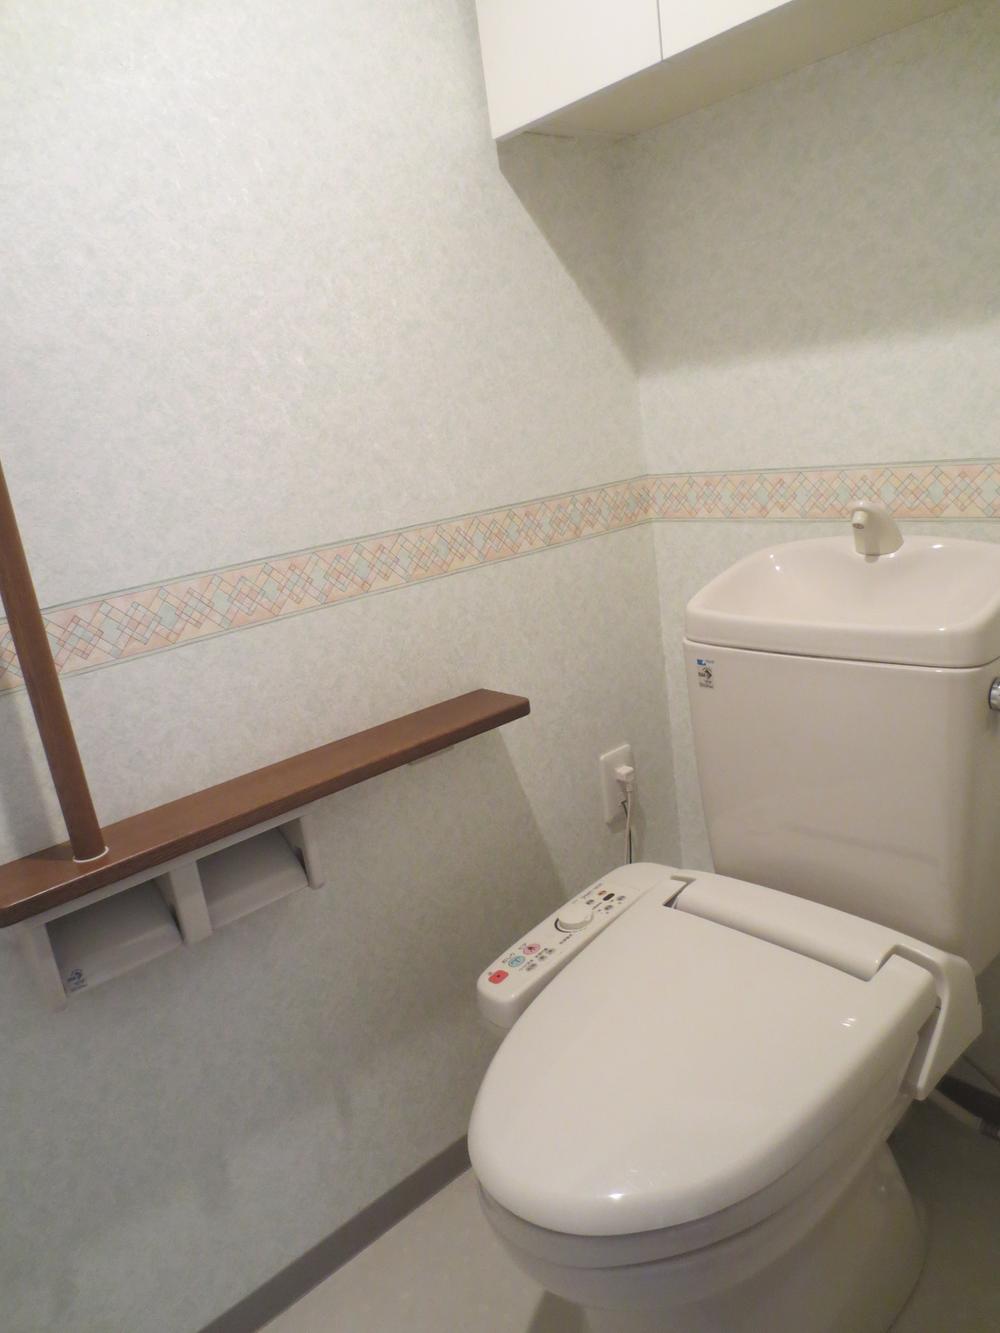 Toilet. Toilet is equipped with a hanging cupboard, Convenient for daily necessities of stock.